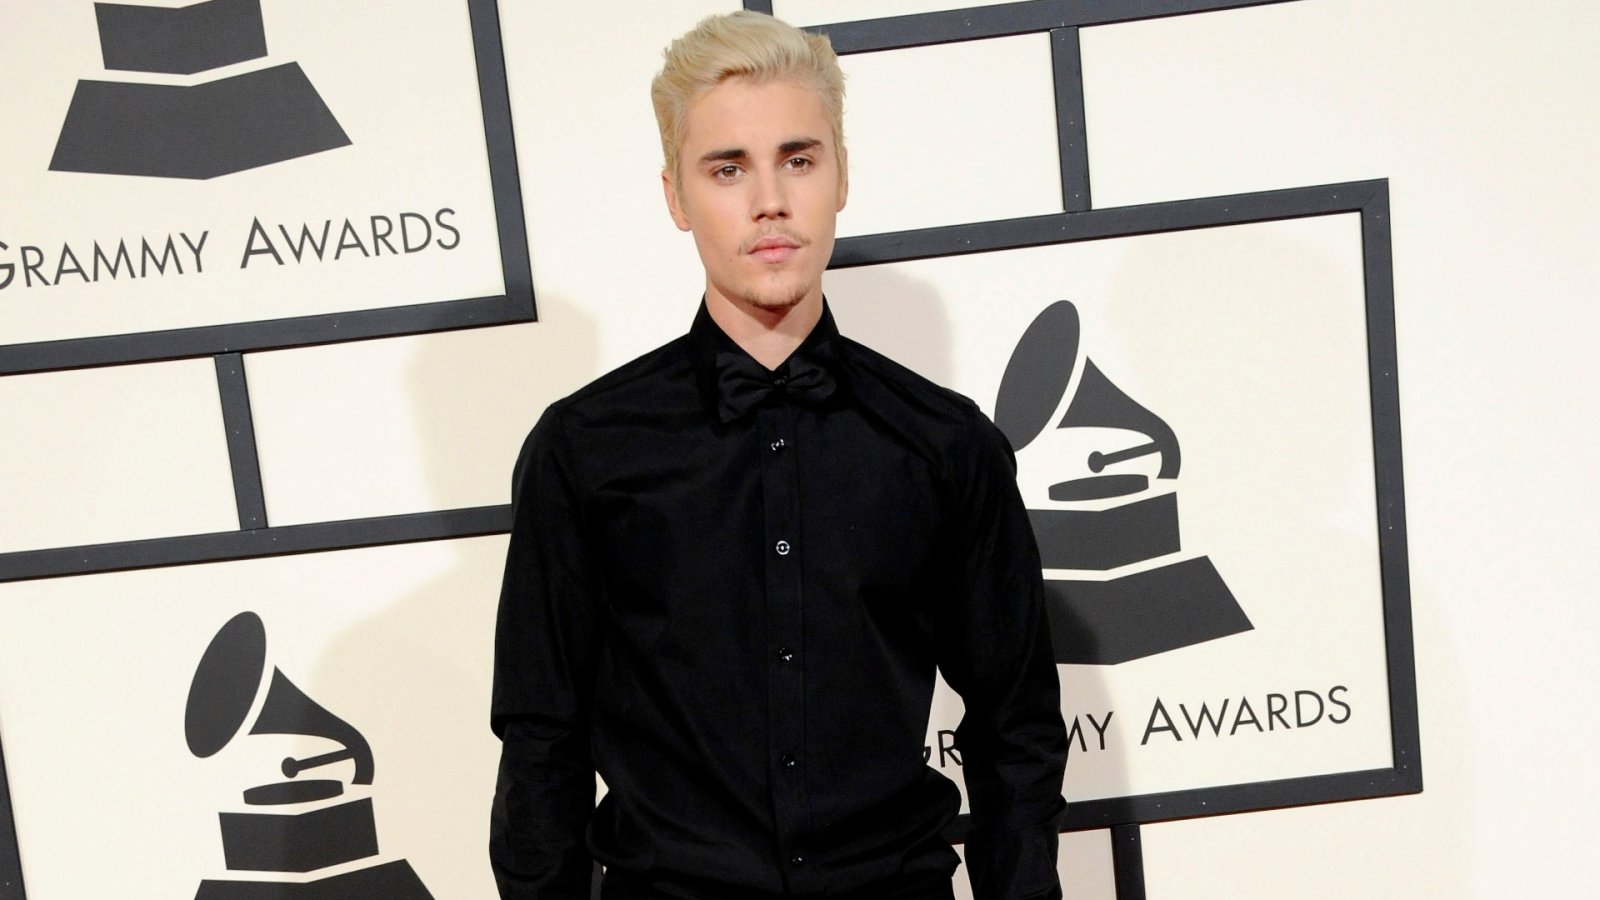 Bieber sells his share of the rights to his music: a deal of 290 songs